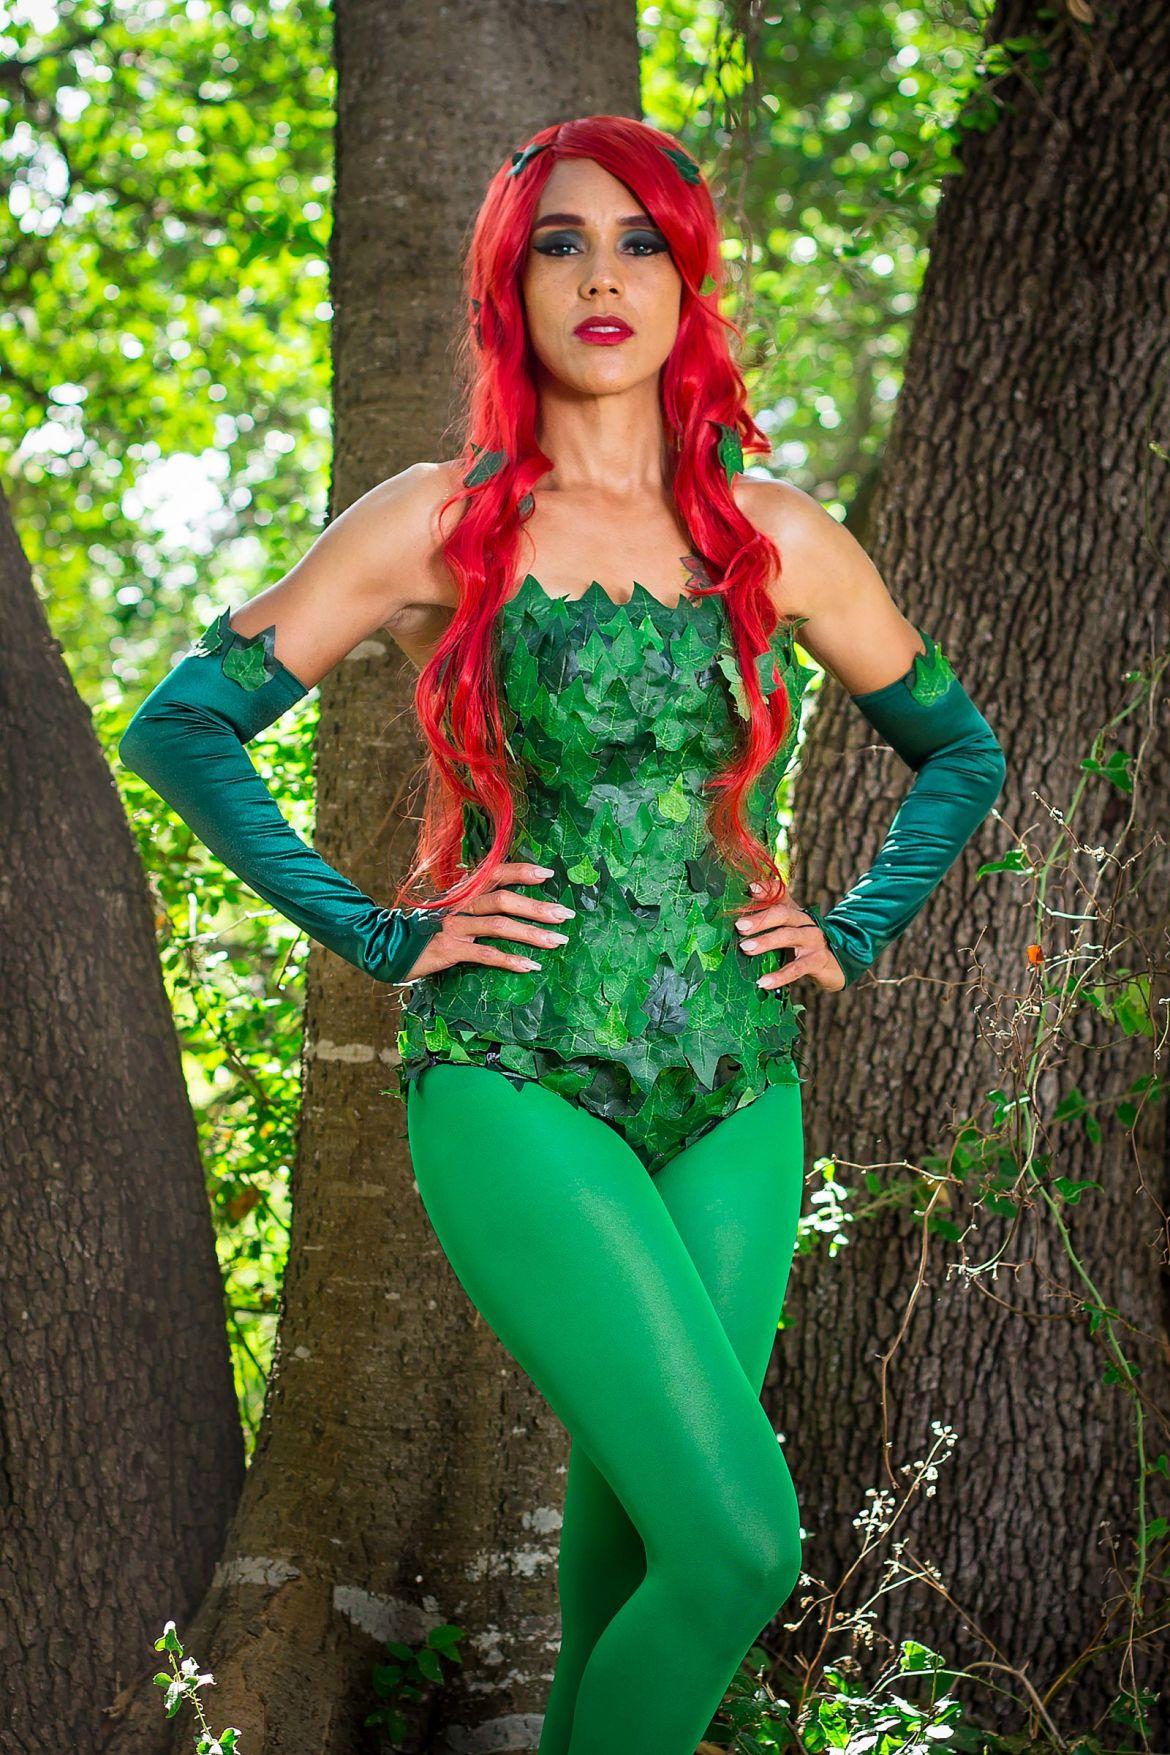 50+ Hot Pictures Of Poison Ivy – One Of The Most Beautiful Batman’s Villain 12